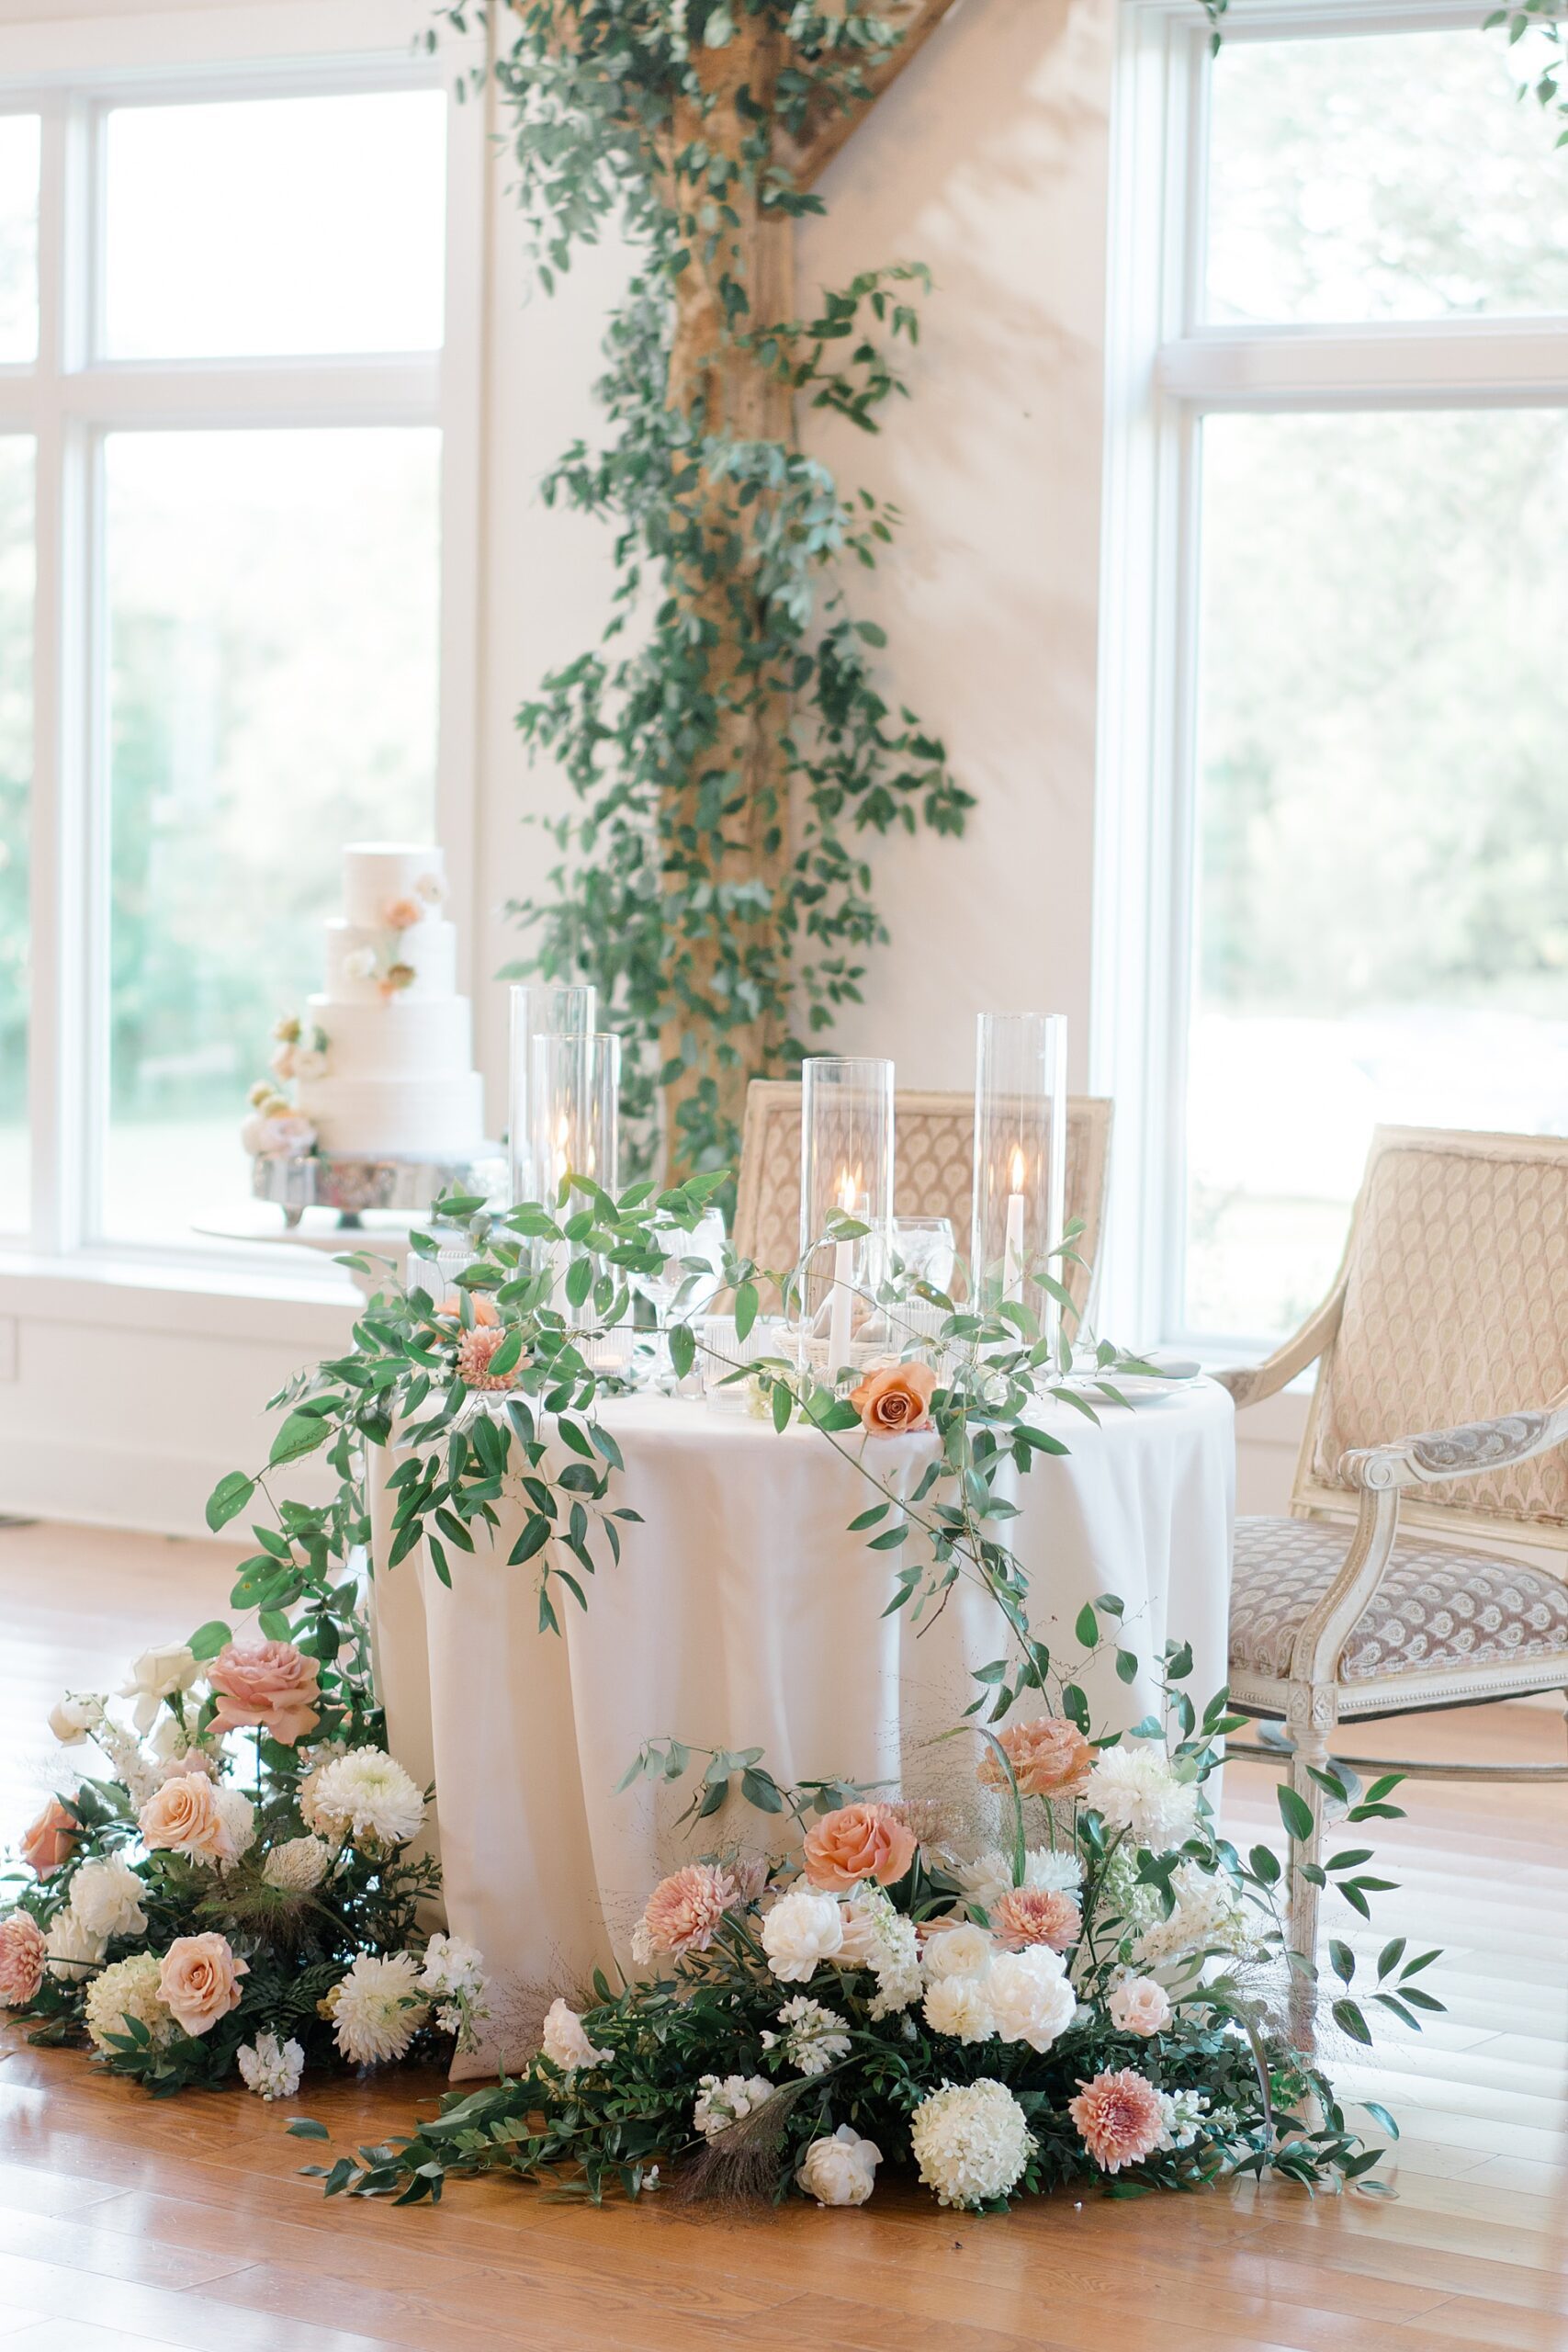 dreamy wedding details from Romantic Floral-Centered Wedding 